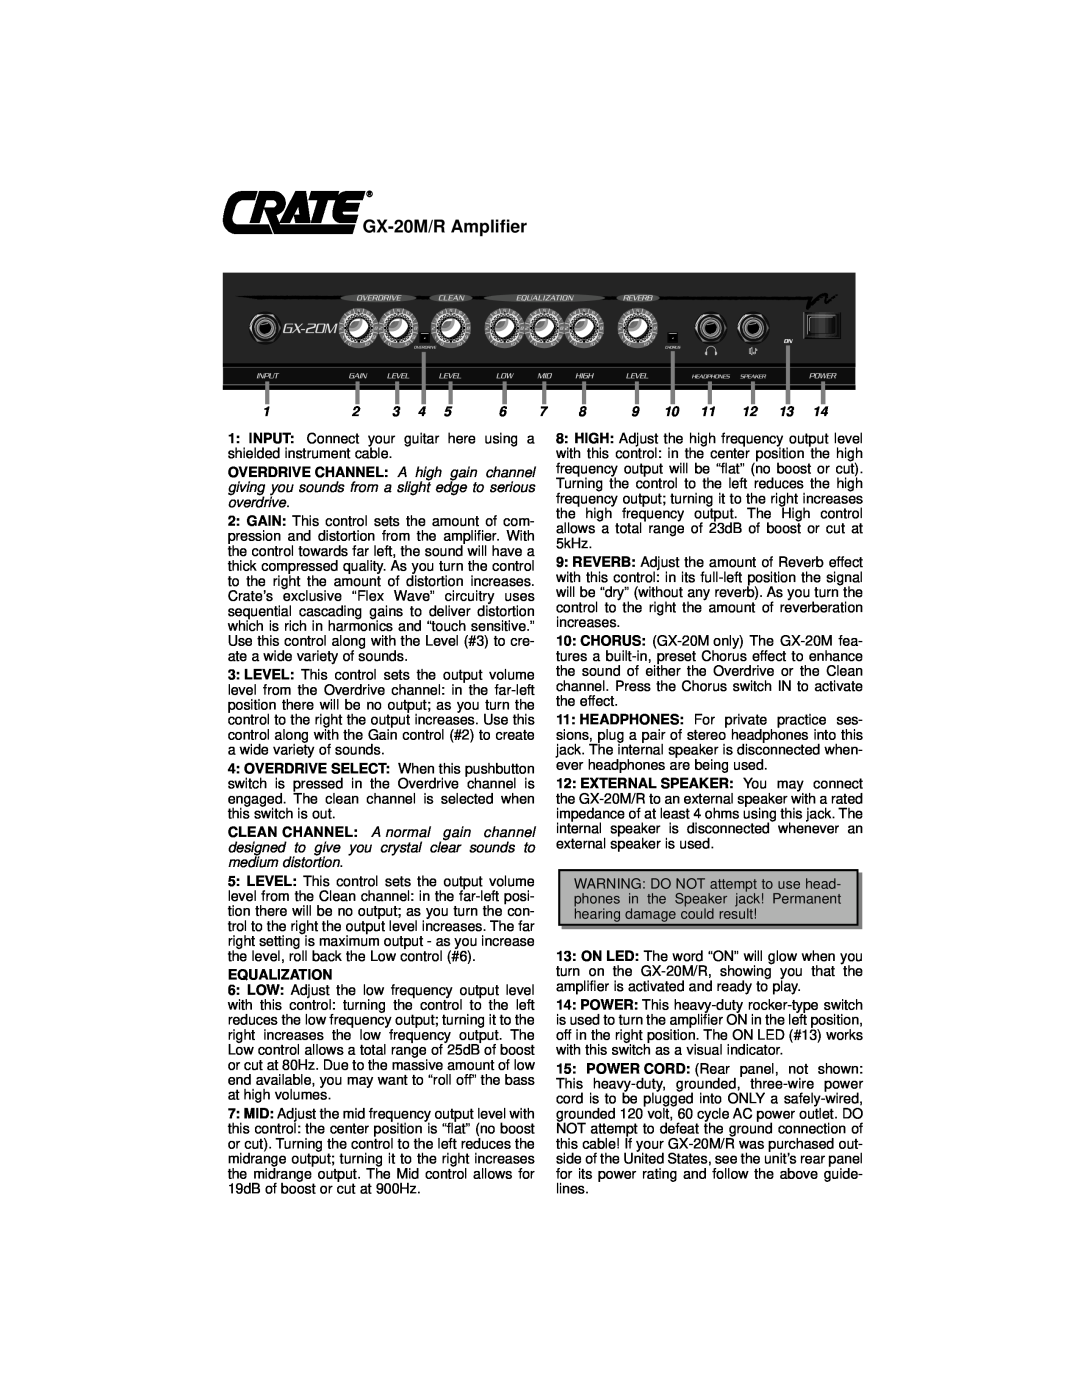 Crate Amplifiers GX-20M /R owner manual GX-20M/RAmplifier, Equalization 